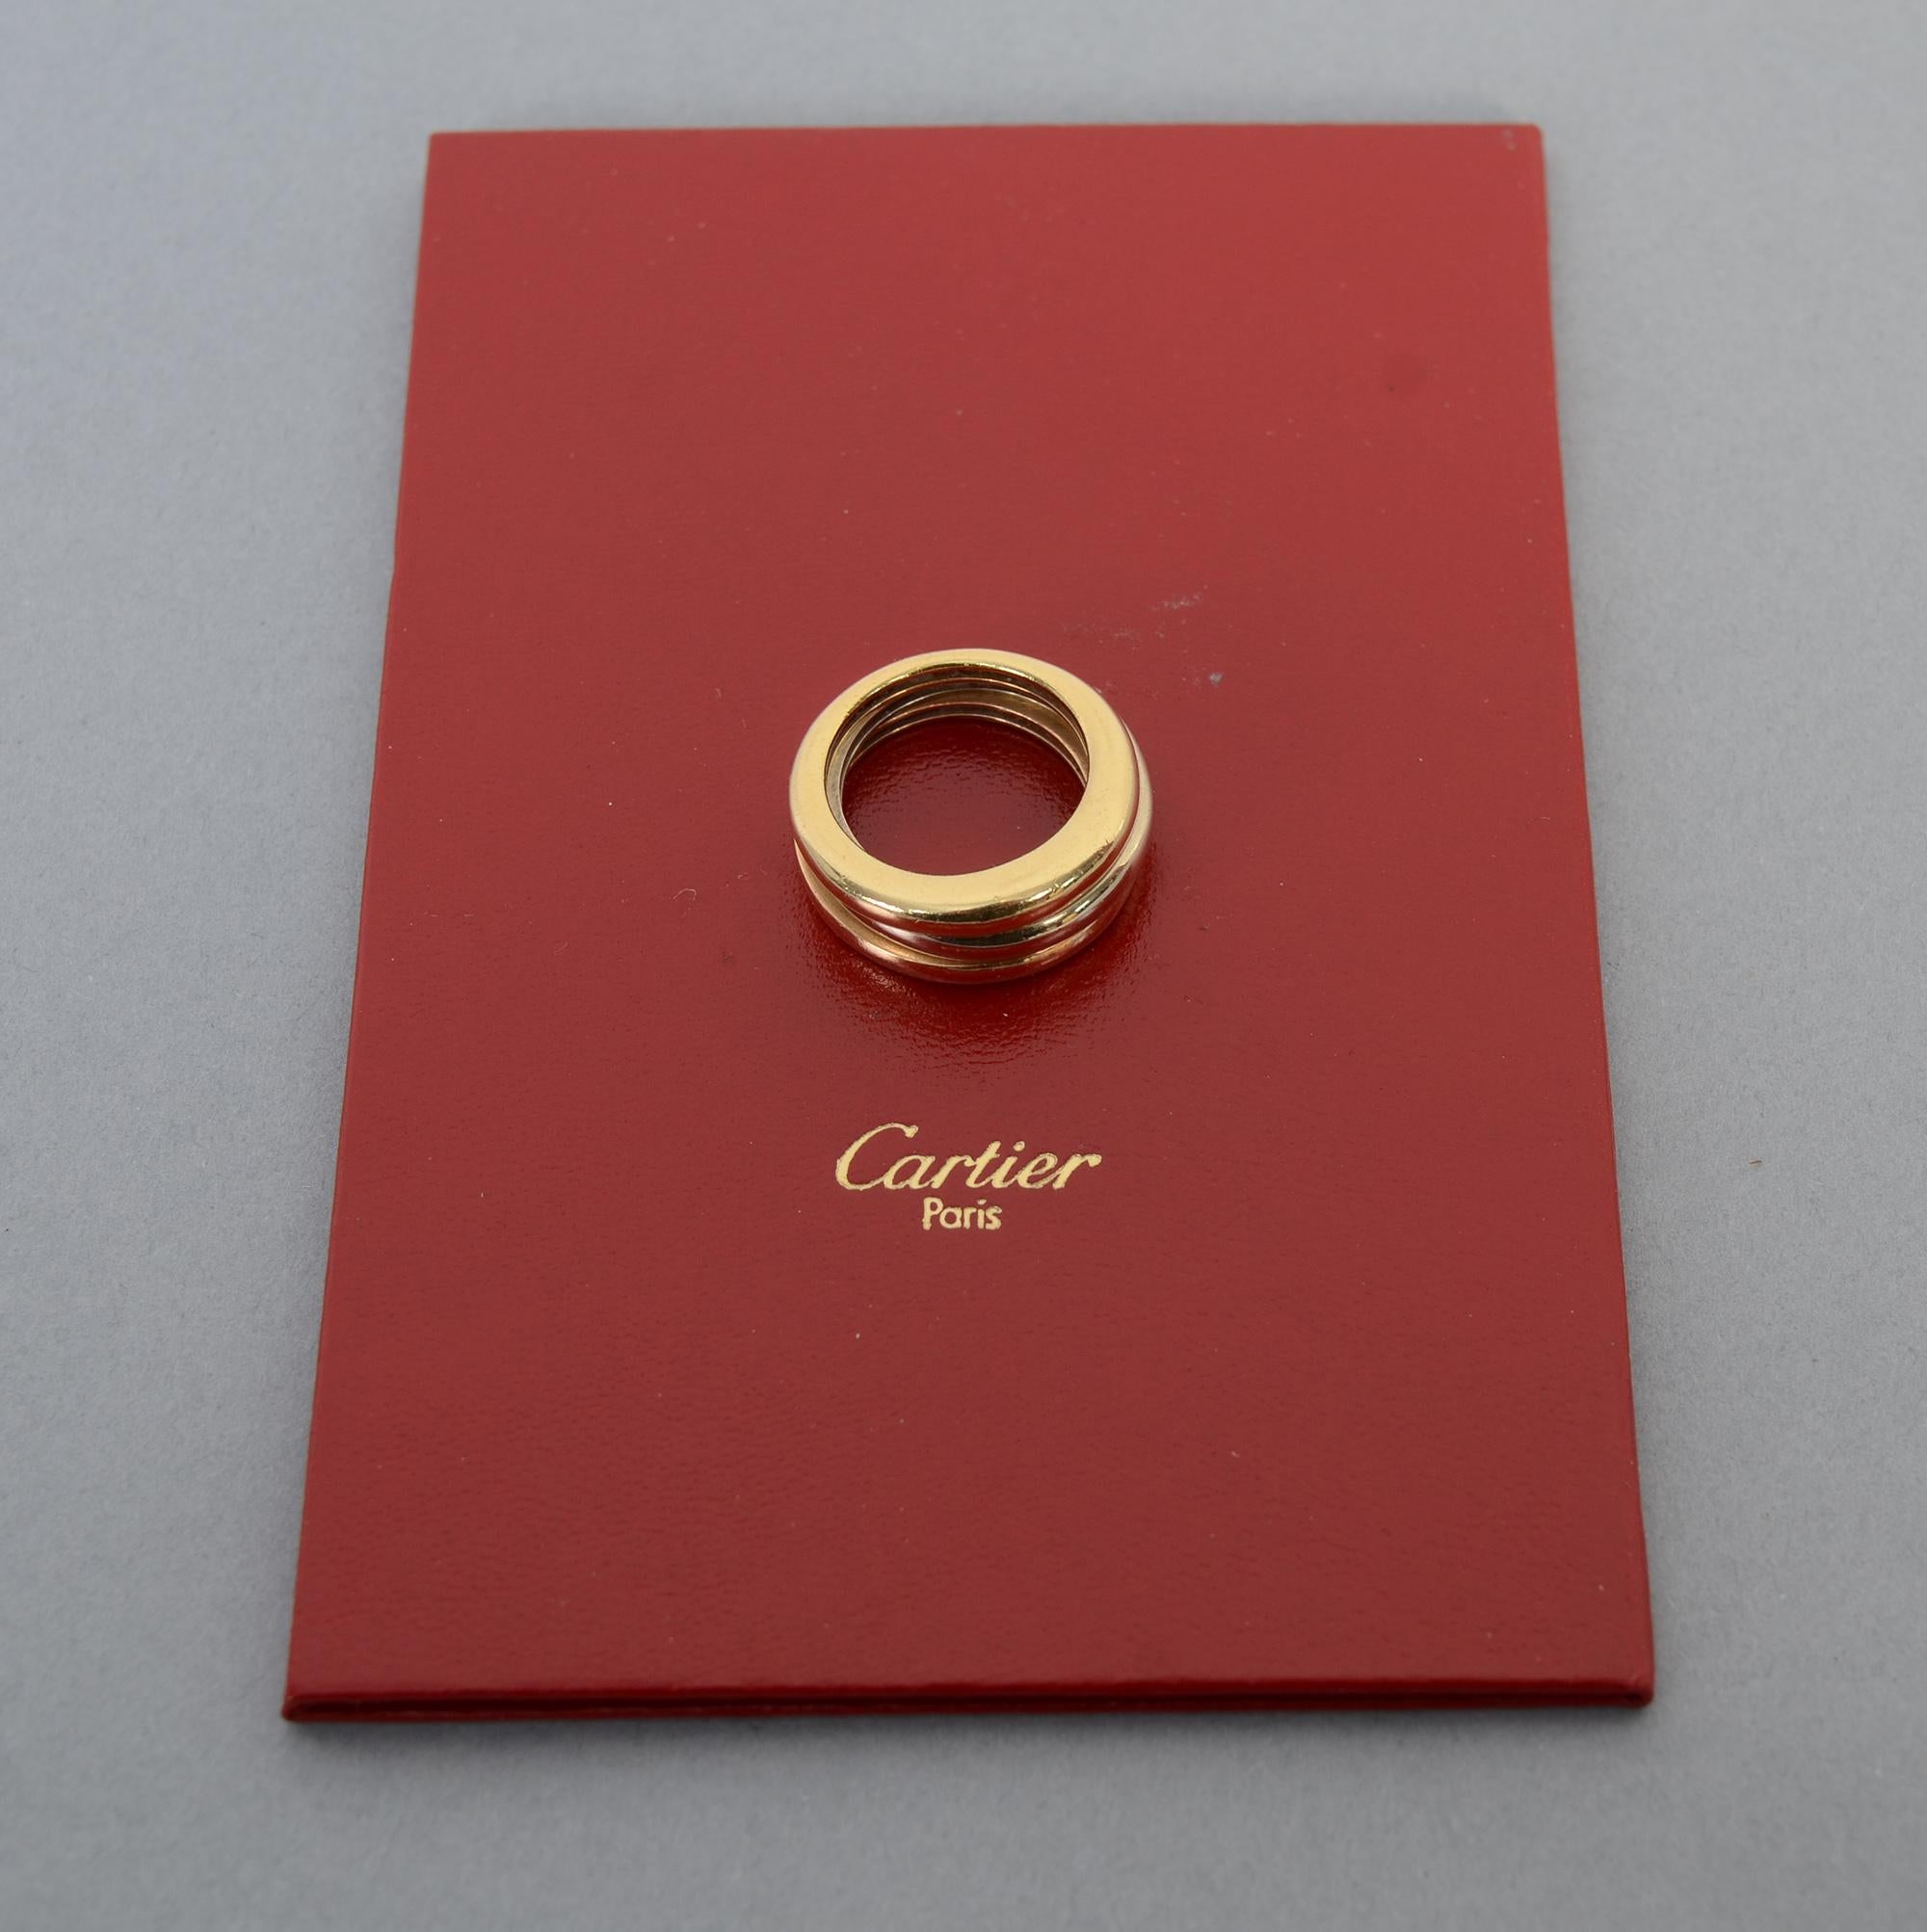 
In 1924, Cartier began their Trinity collection in which they combine elements of yellow; white and rose gold. The white is meant to denote lasting friendship; rose gold is for true love and the white signifies fidelity. They have expanded the